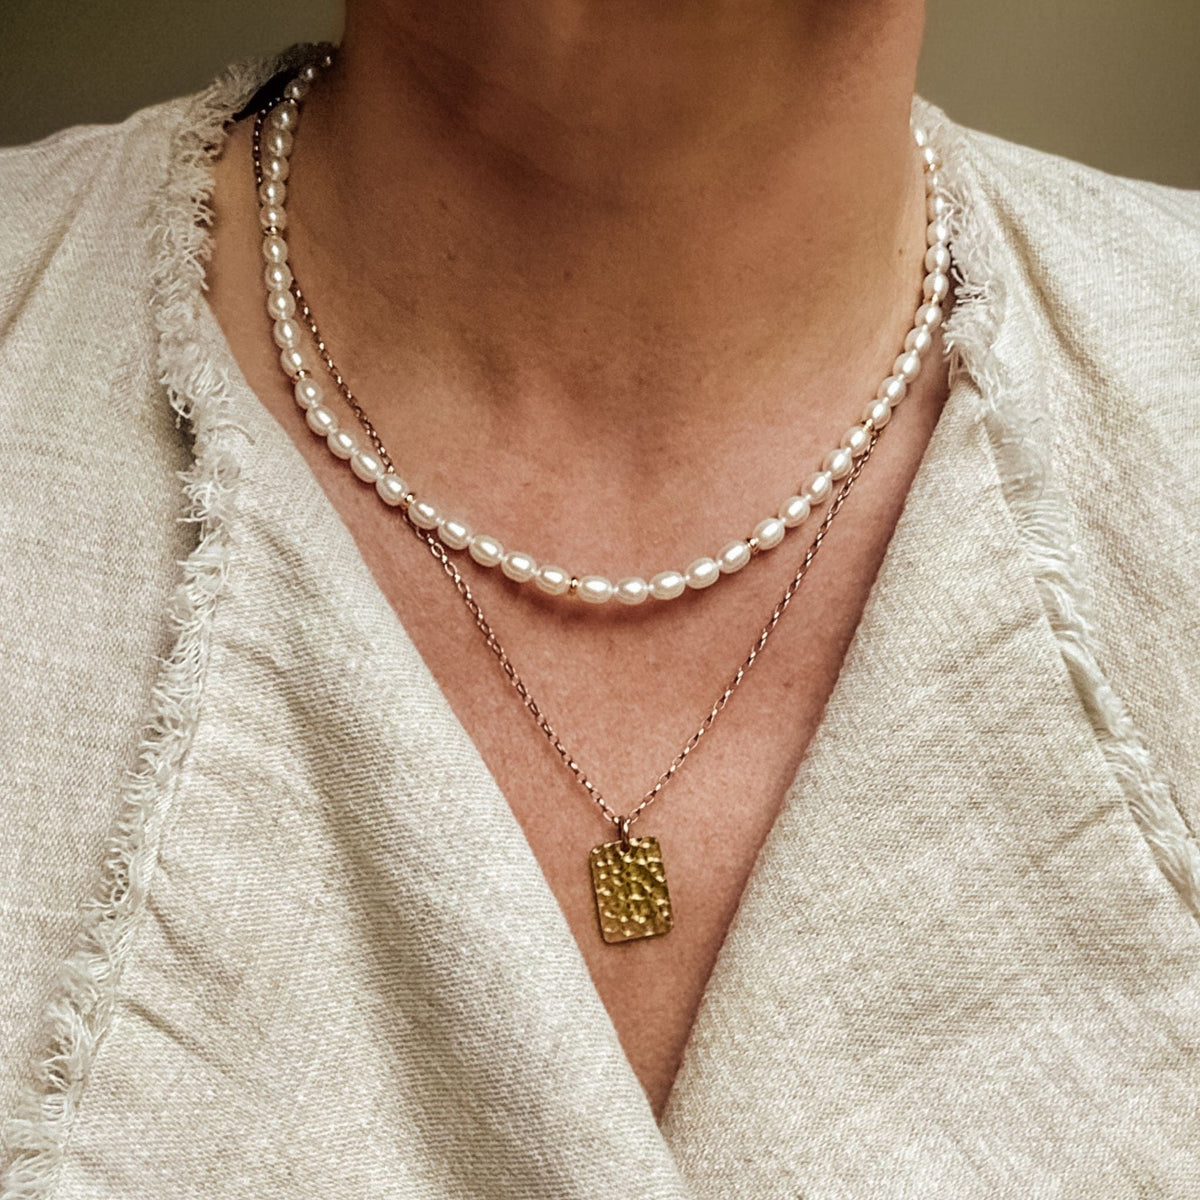 Elegant Pearl Necklace lying flat on a white background made with the highest quality freshwater pearls and 24K gold plated Sterling silver beads layered here for a more personal and laid back look